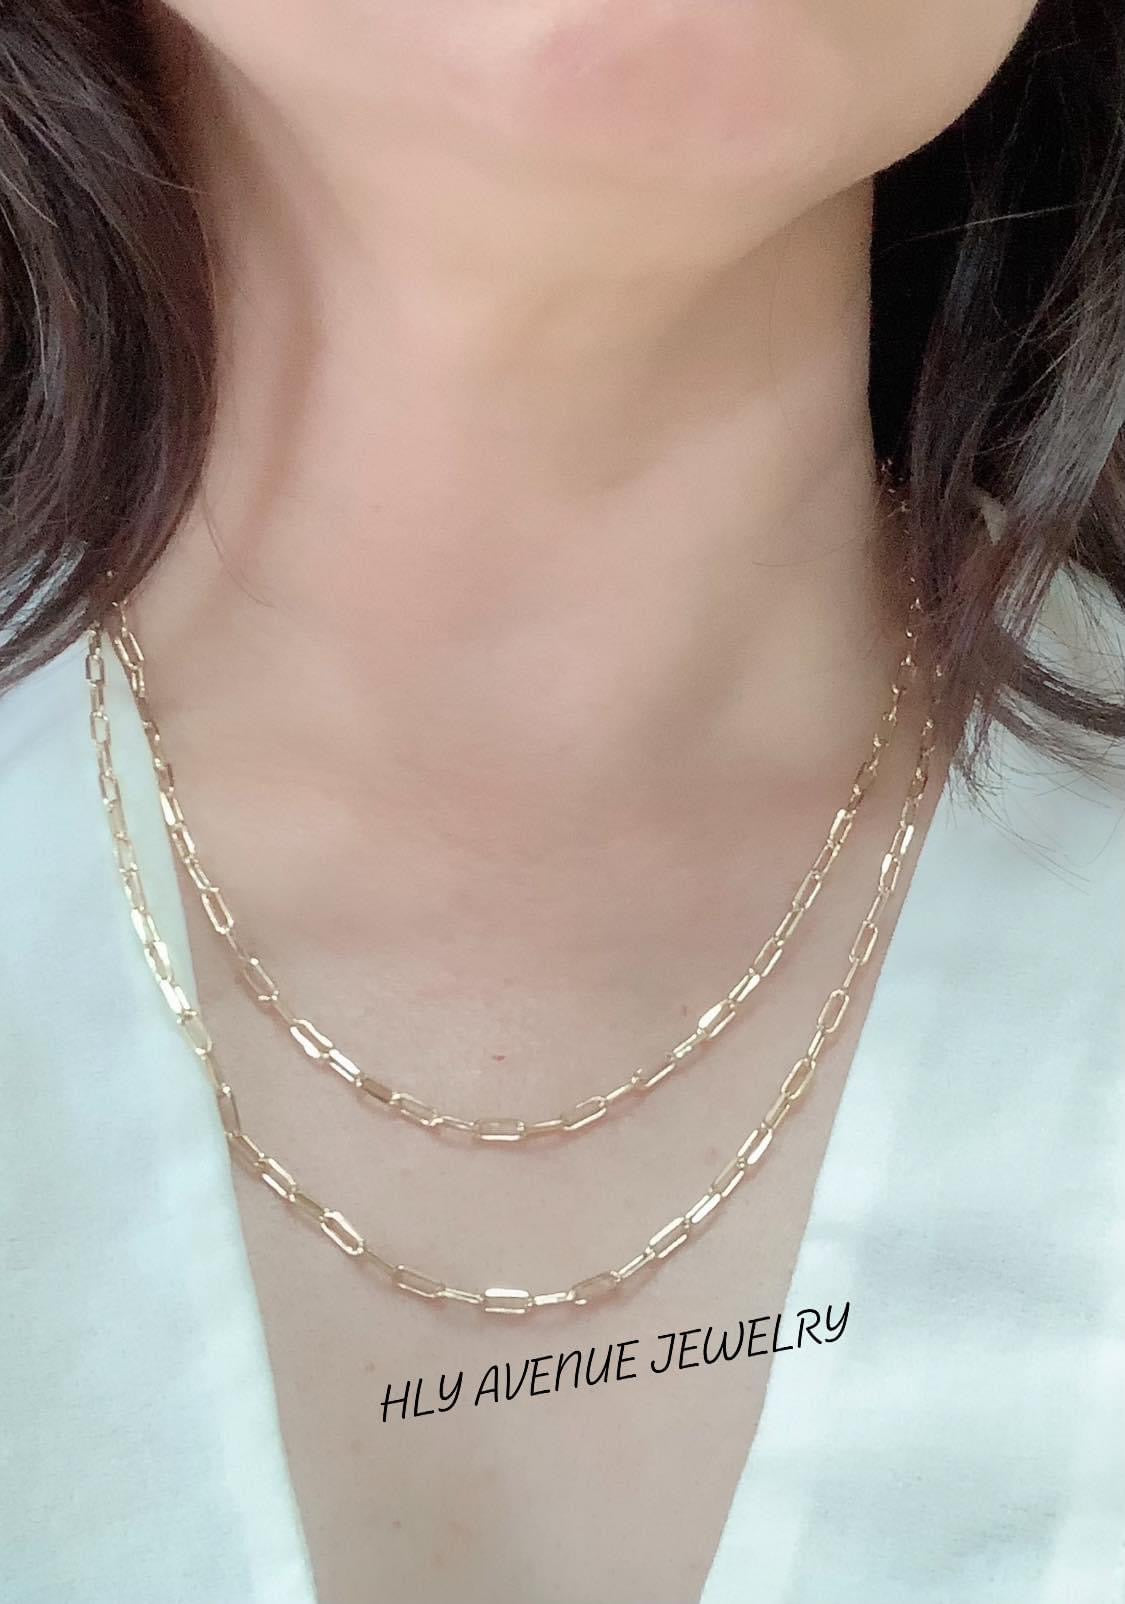 Italian 18kt Yellow Gold Paper Clip Link Necklace | Ross-Simons